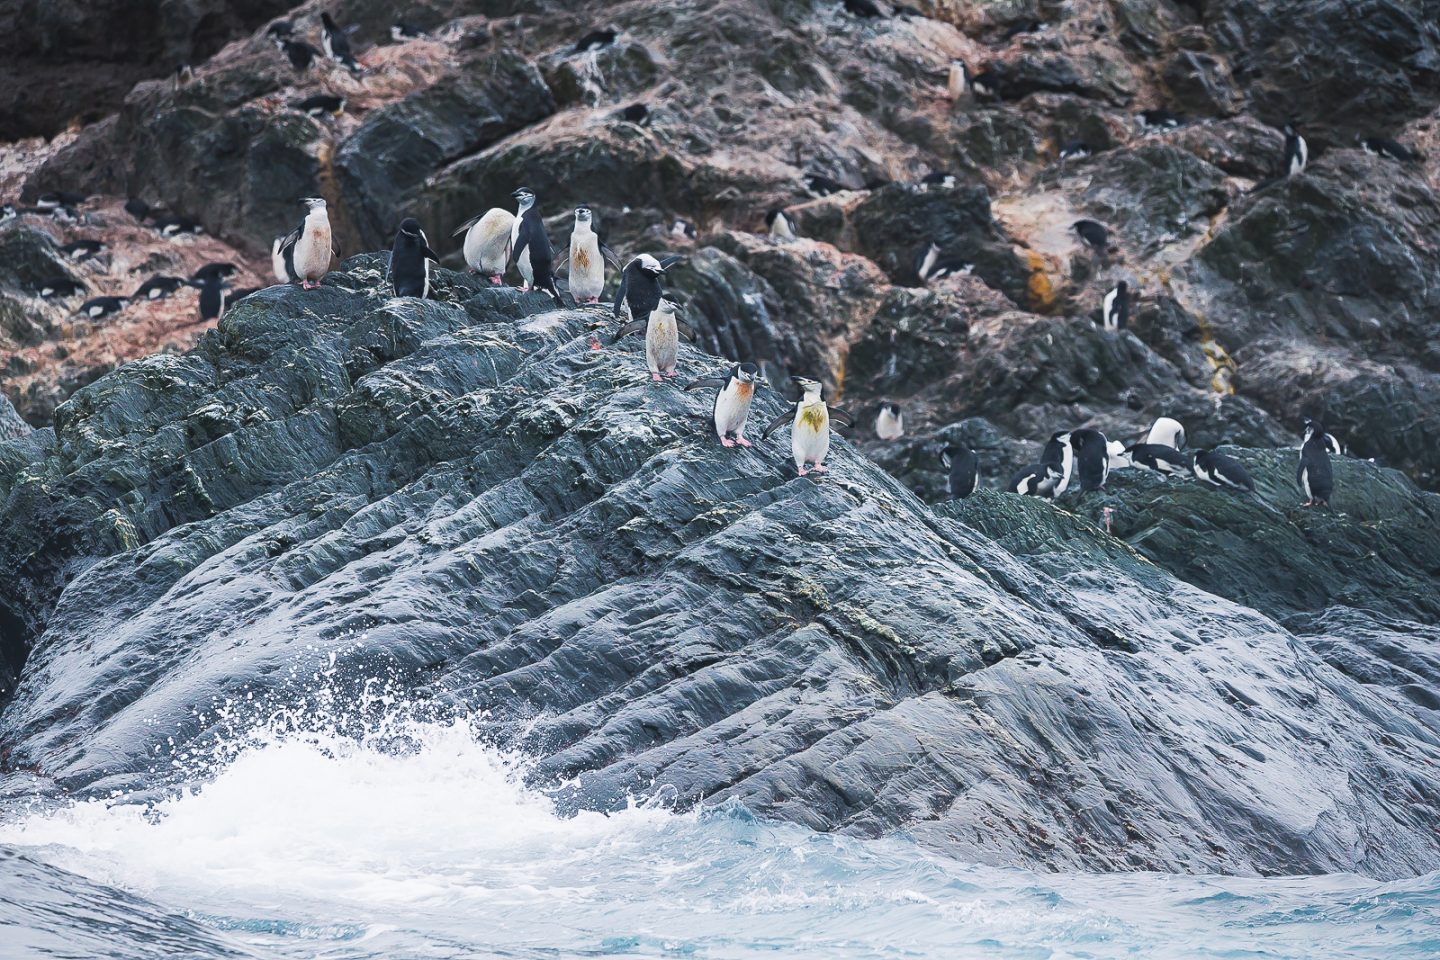 Chinstrap penguins ready to jump into ice cold water